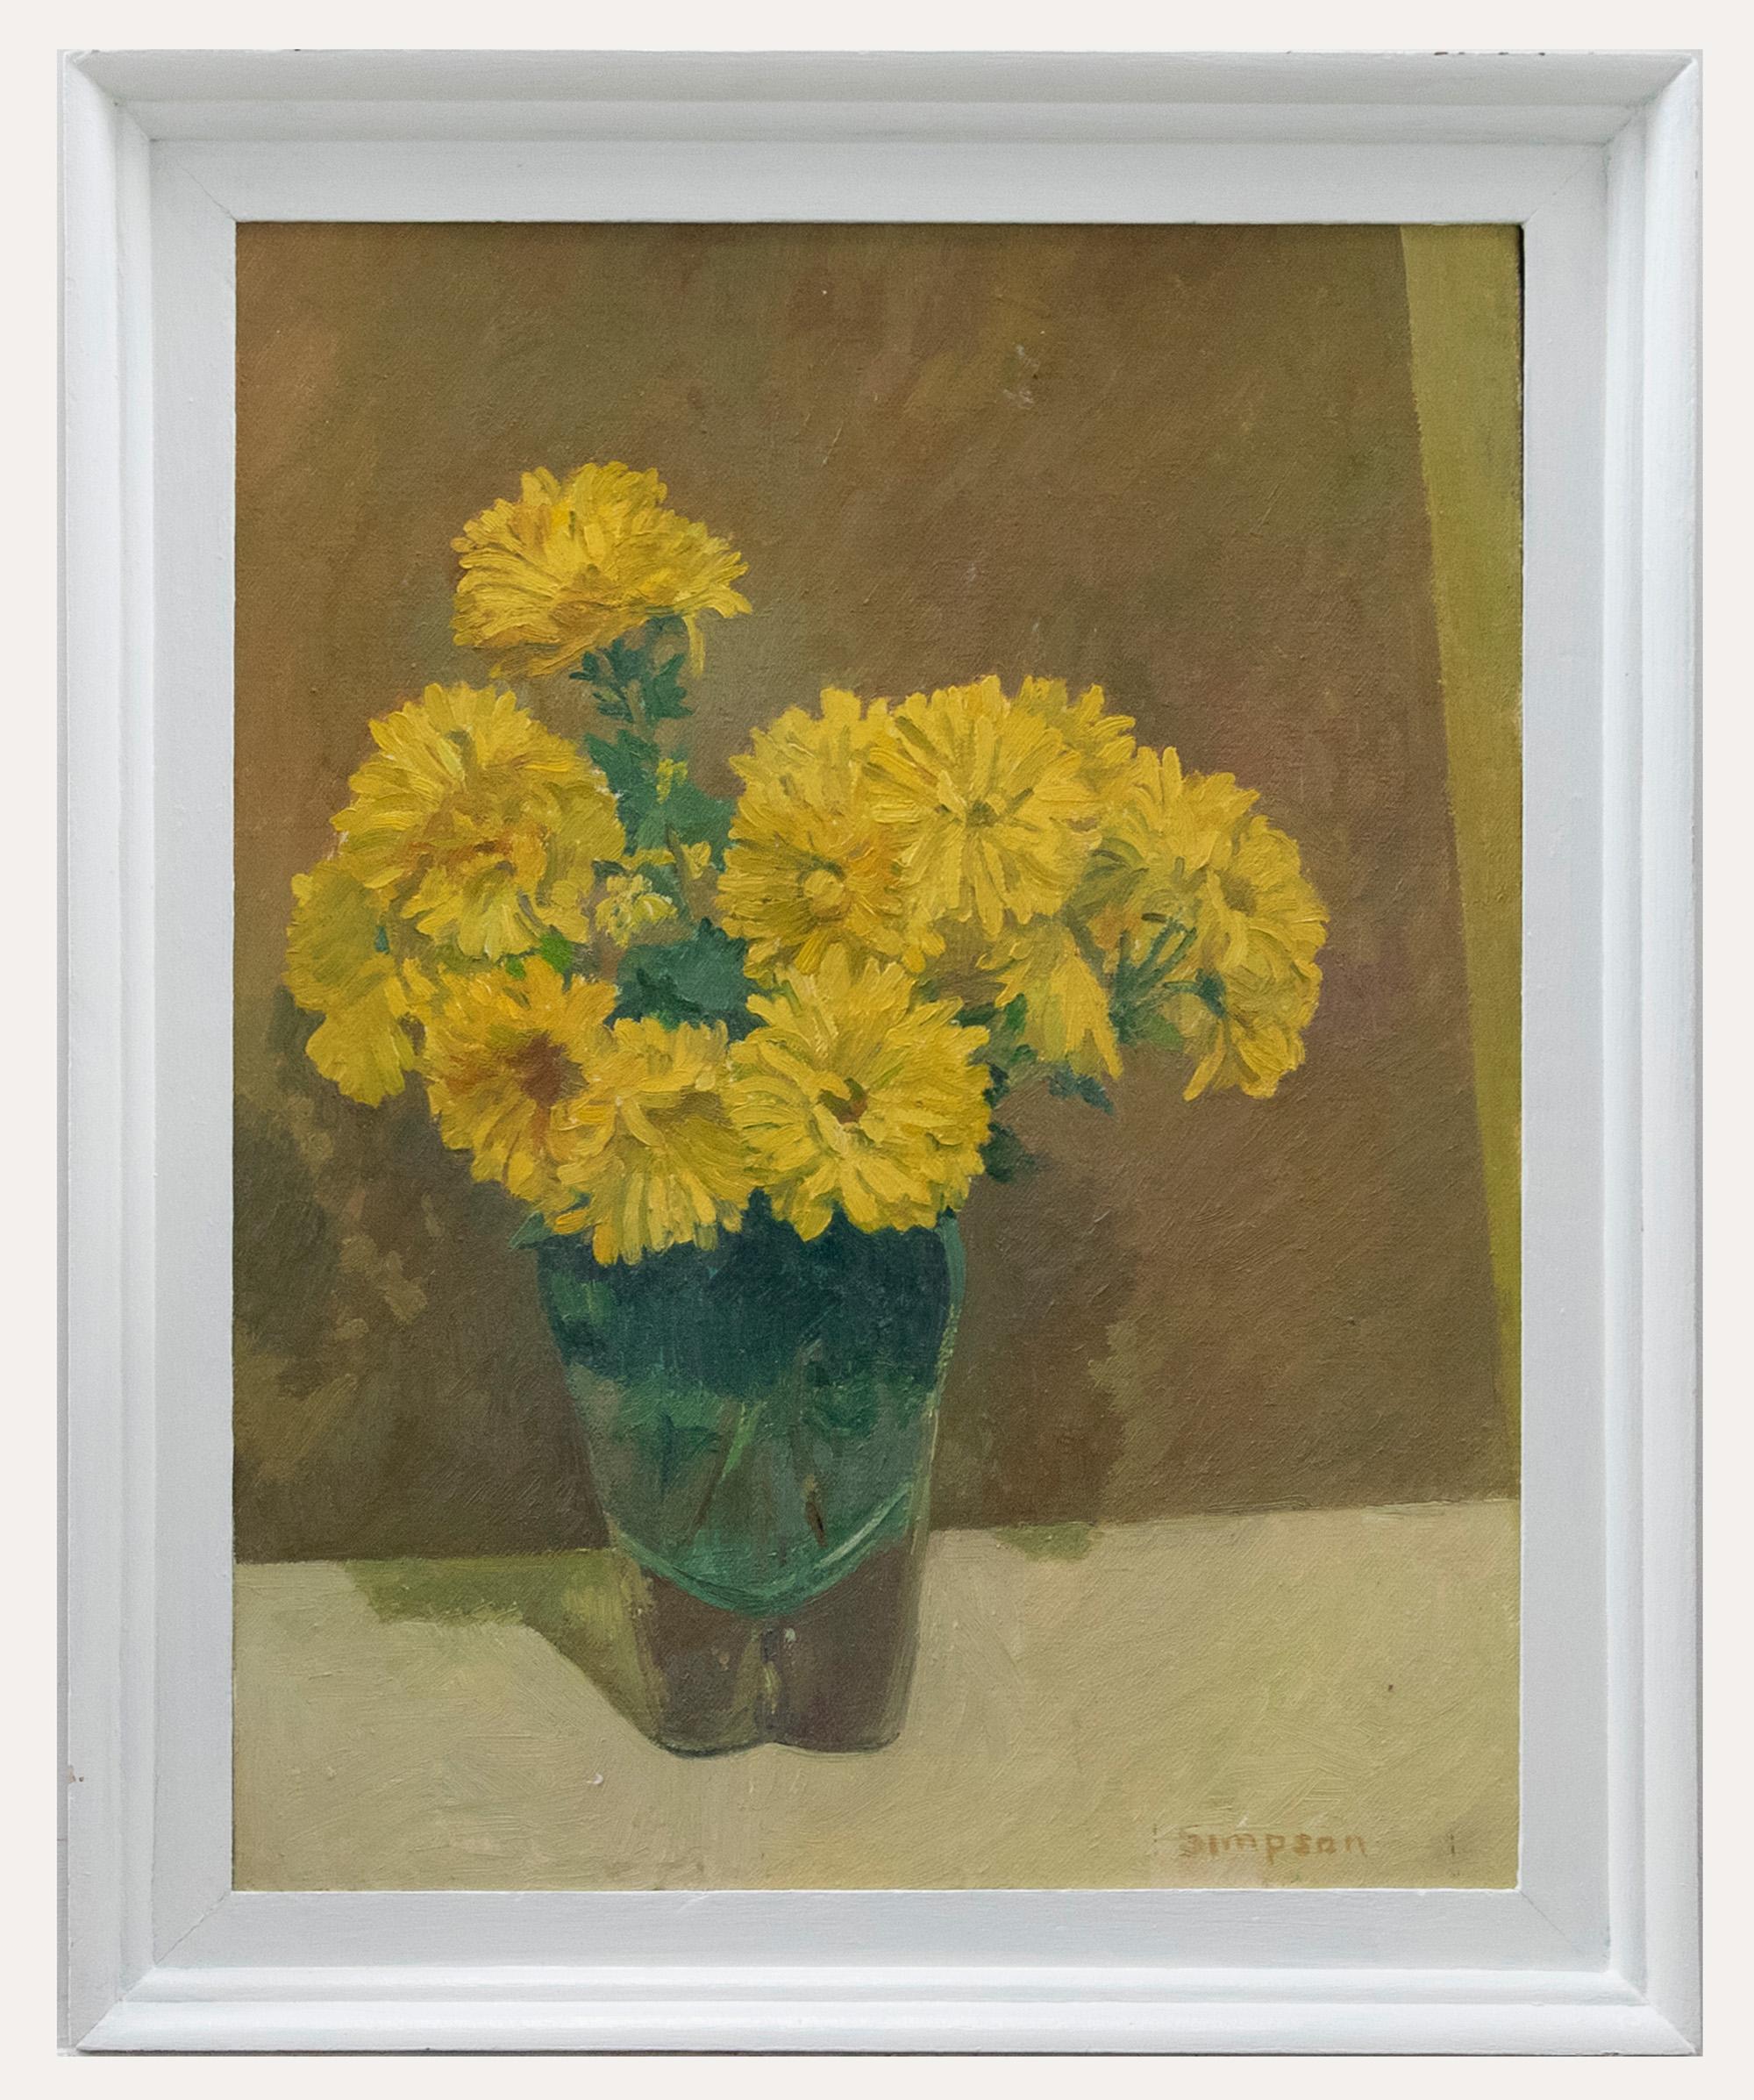 Unknown Still-Life Painting - J. Simpson - Contemporary Oil, Yellow Chrysanthemums